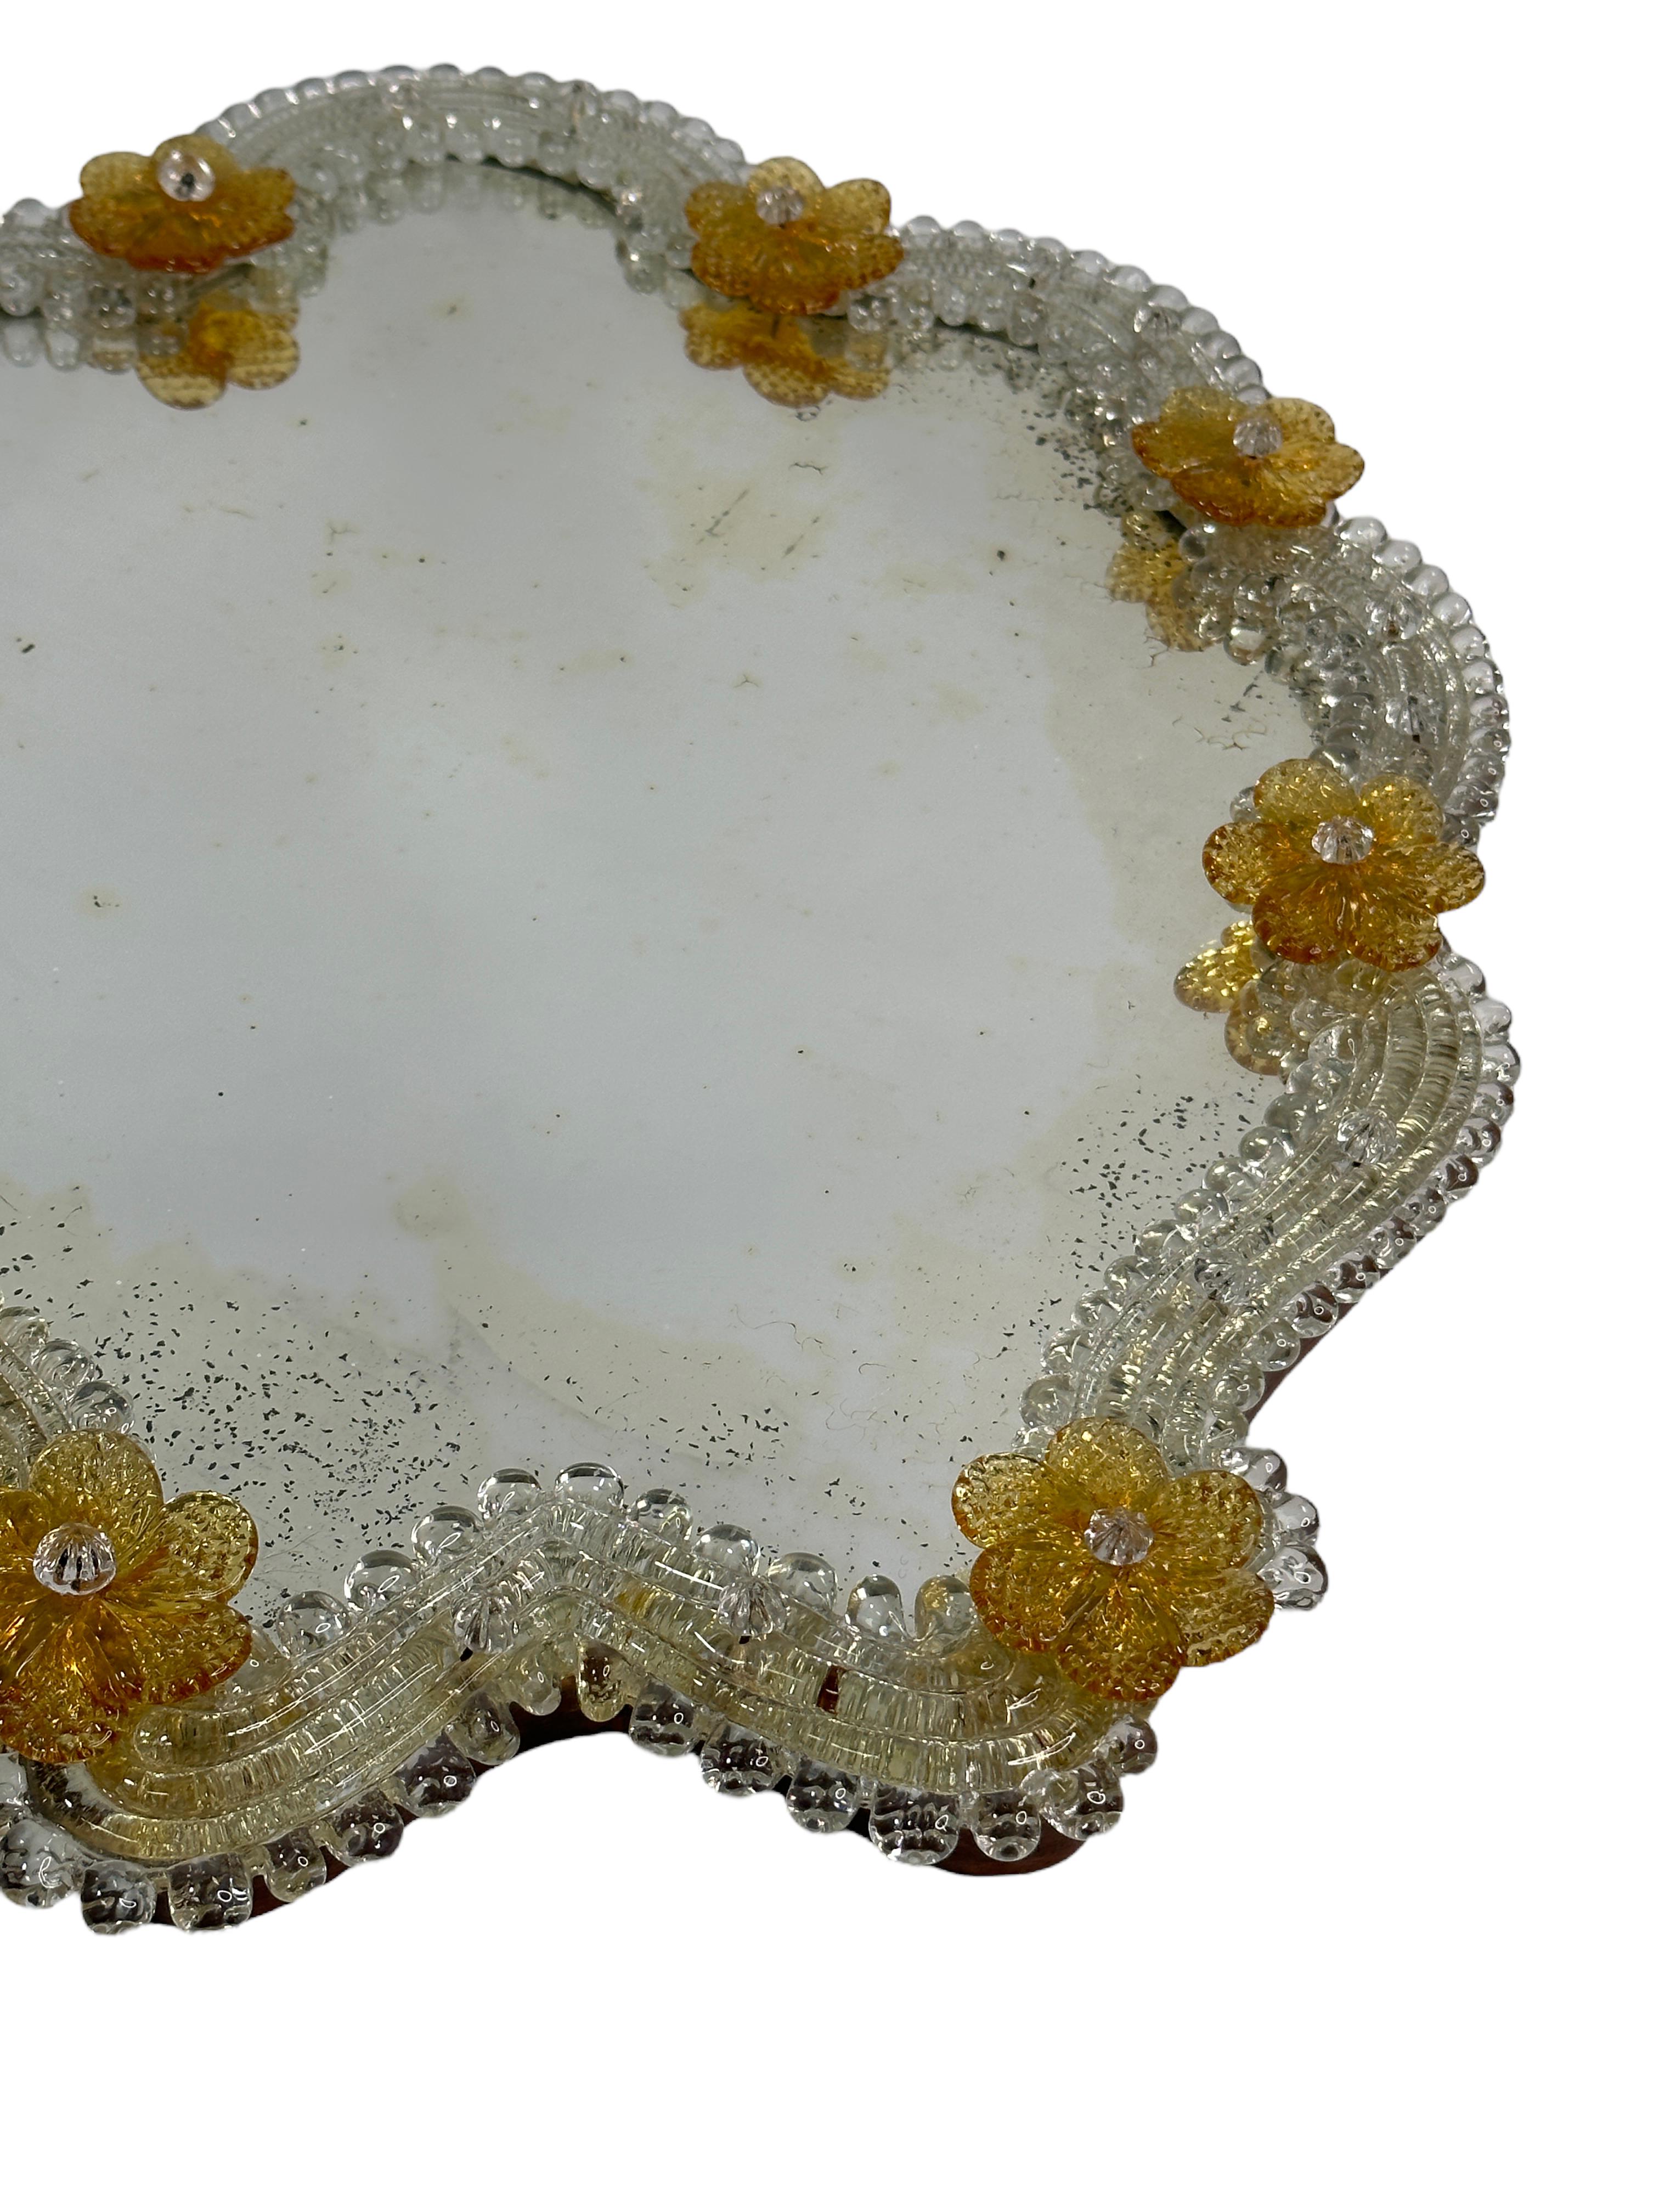 Exceptional Beautiful Murano Glass Wall Mirror 1930s, Venice Italy For Sale 6